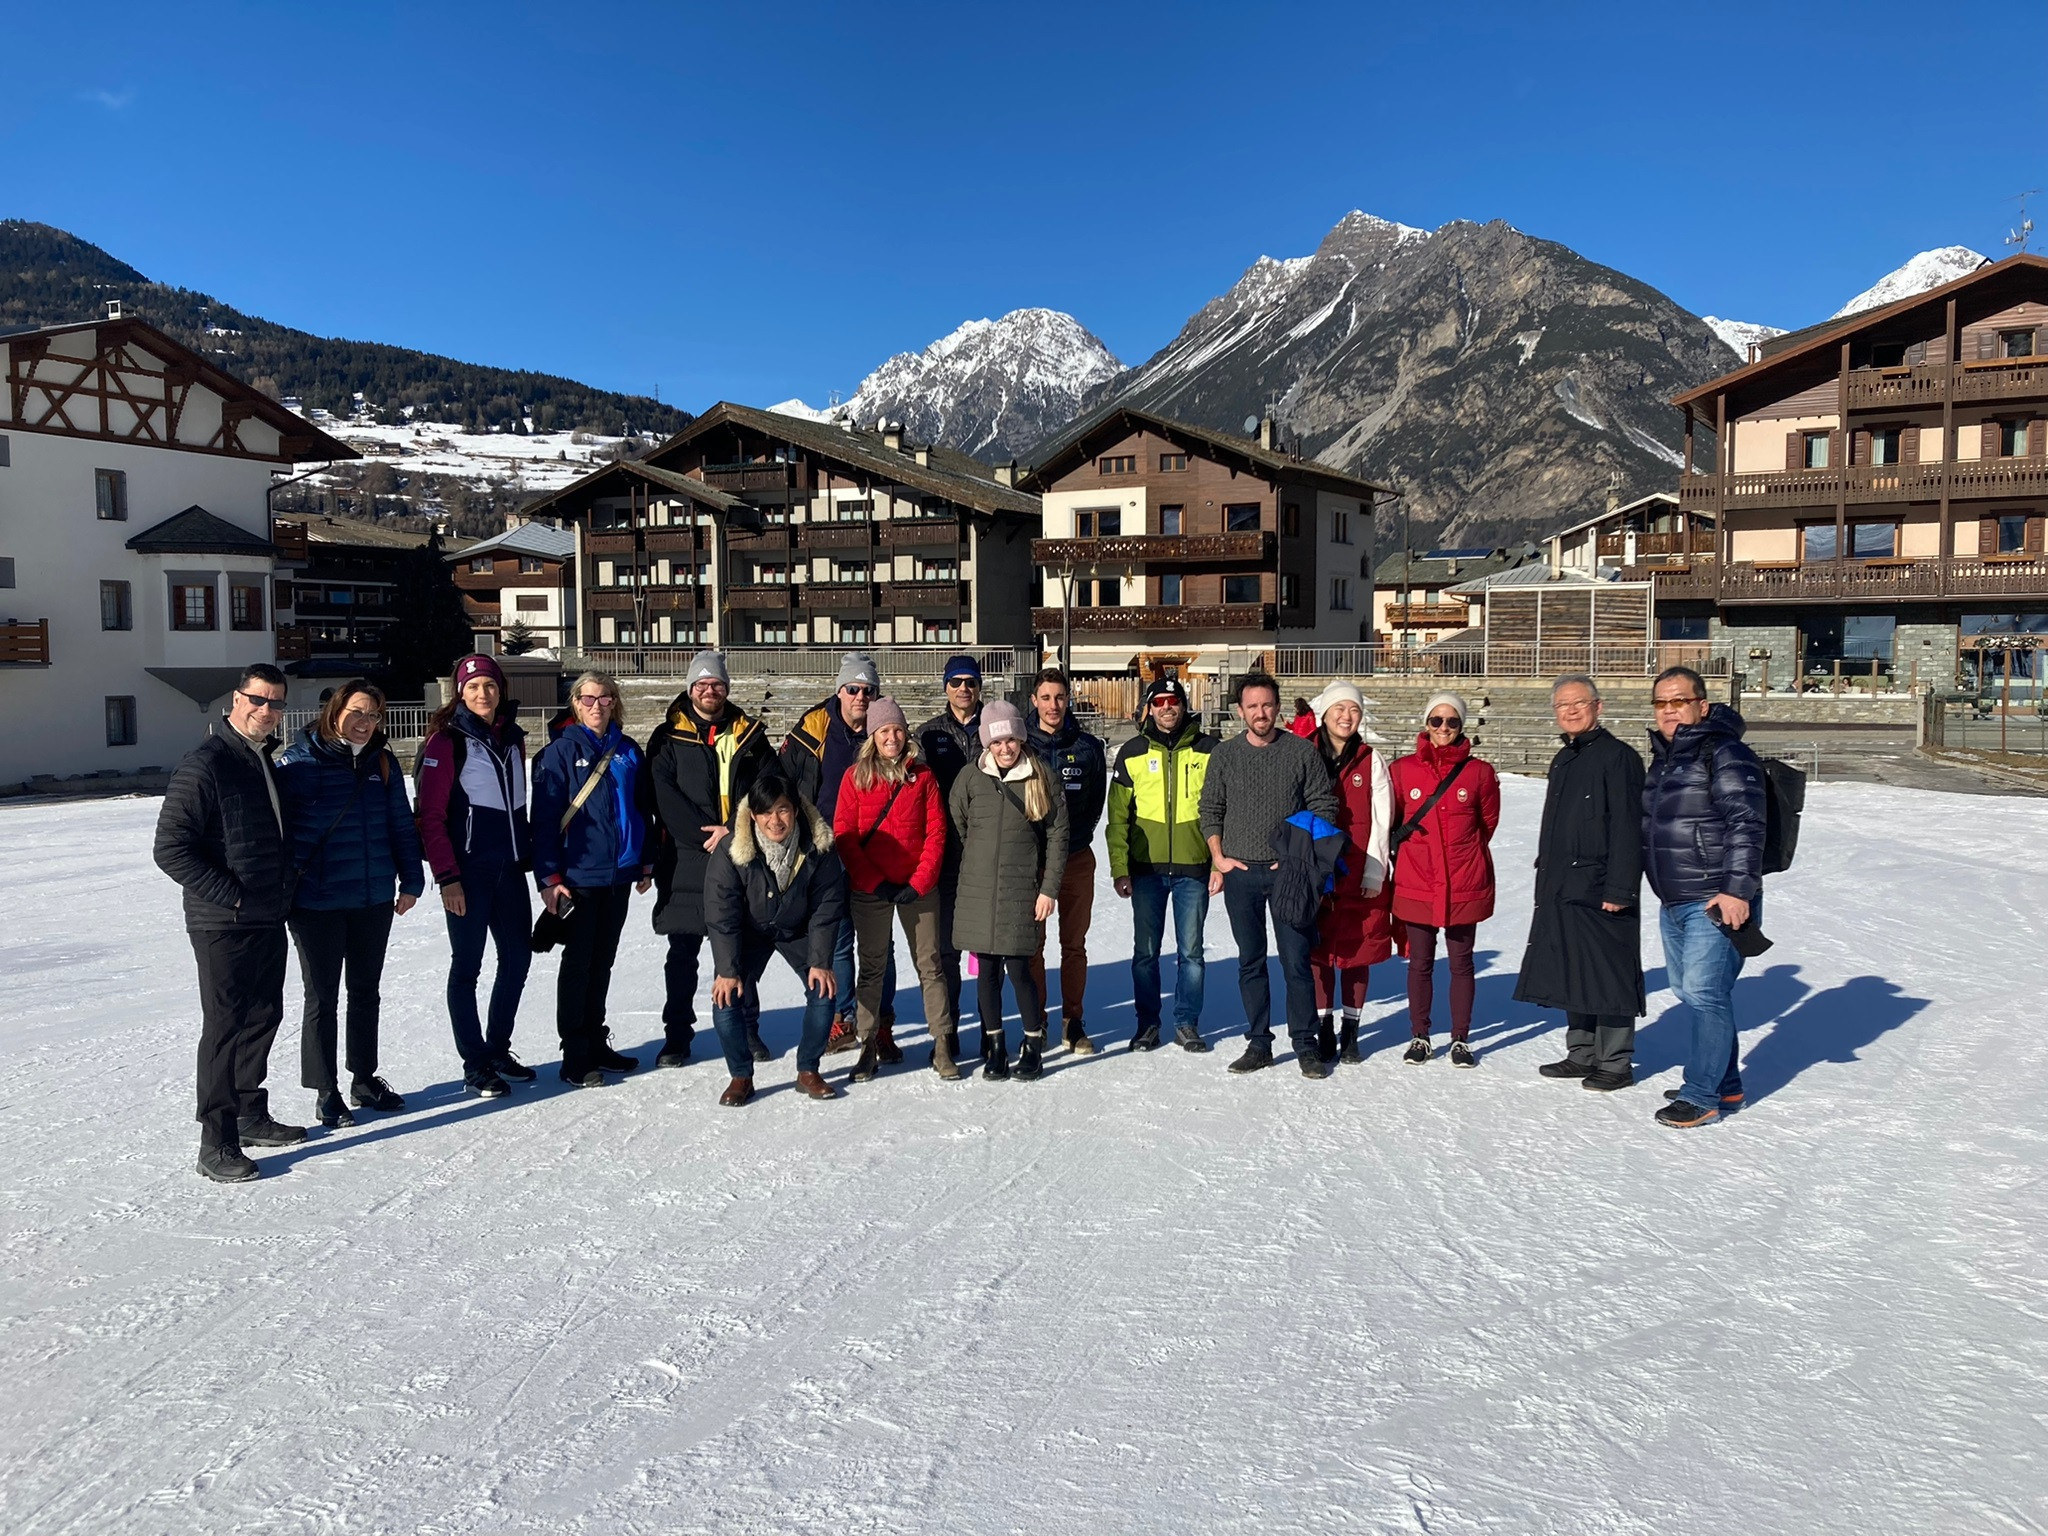 Olympic and Paralympic officials from seven nations have conducted a two week inspection of facilities ©Milan Cortina 2026